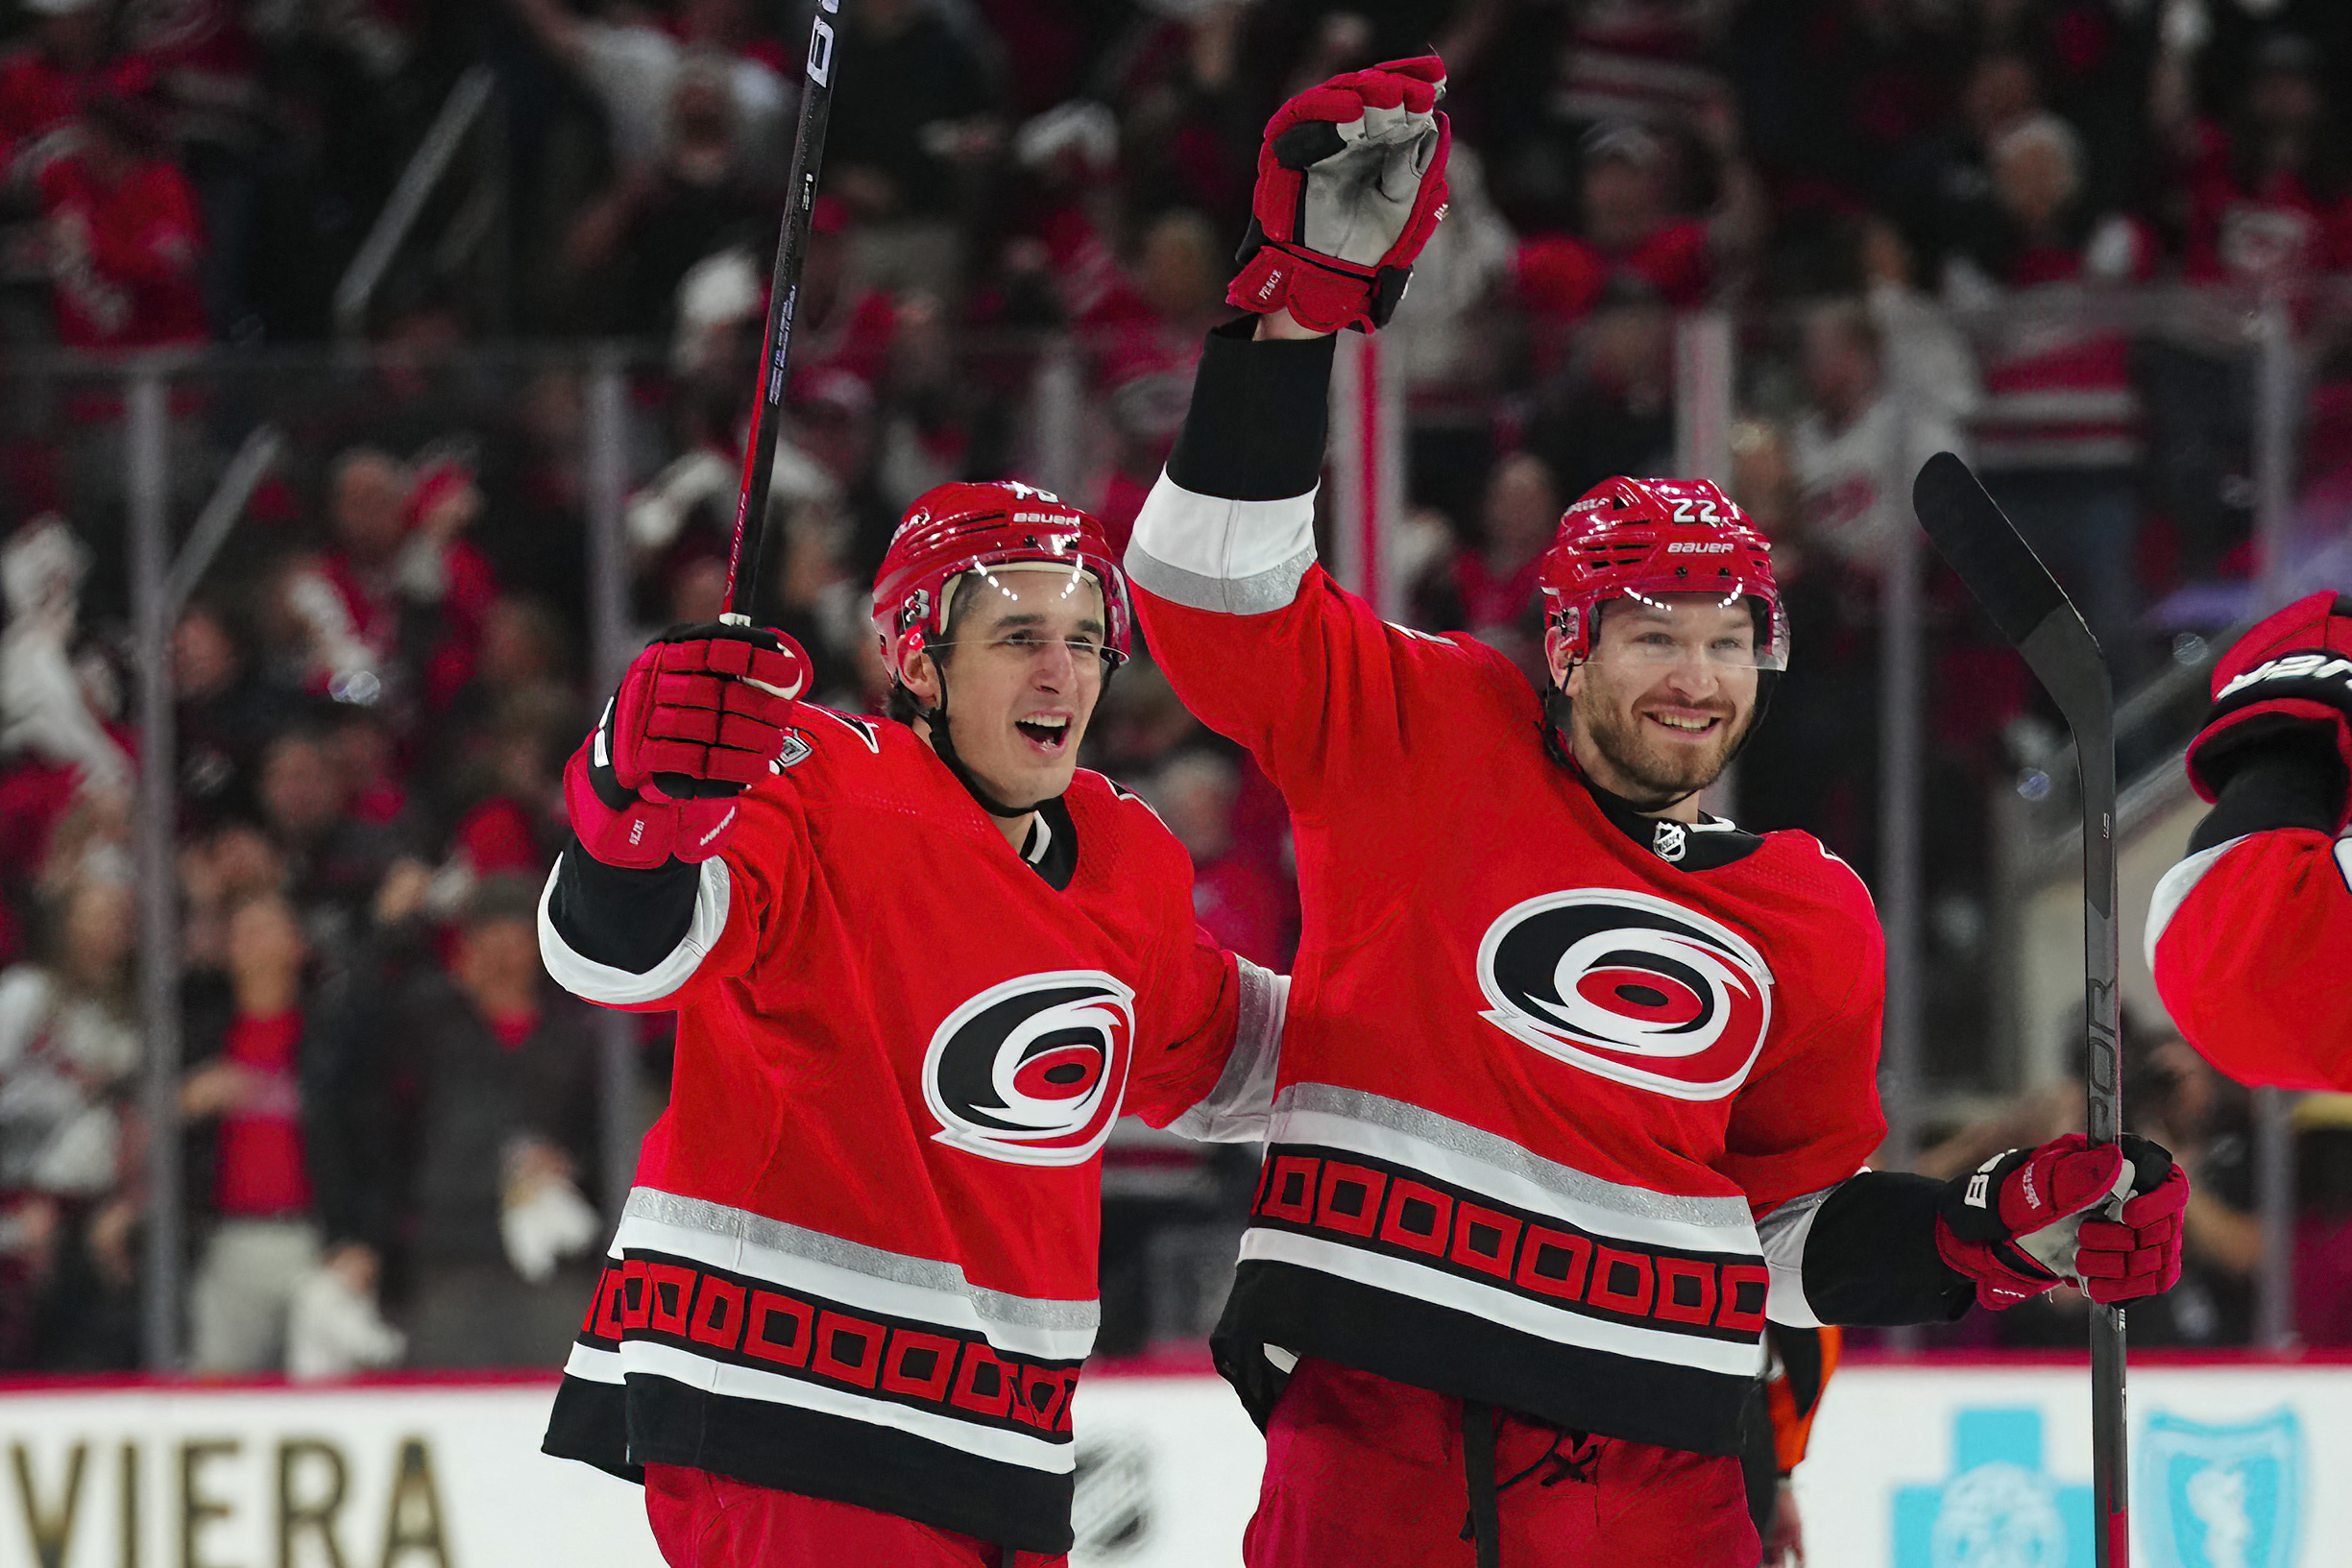 NHL: Carolina Hurricanes top Devils 5-1 in Game 1 of 2nd round